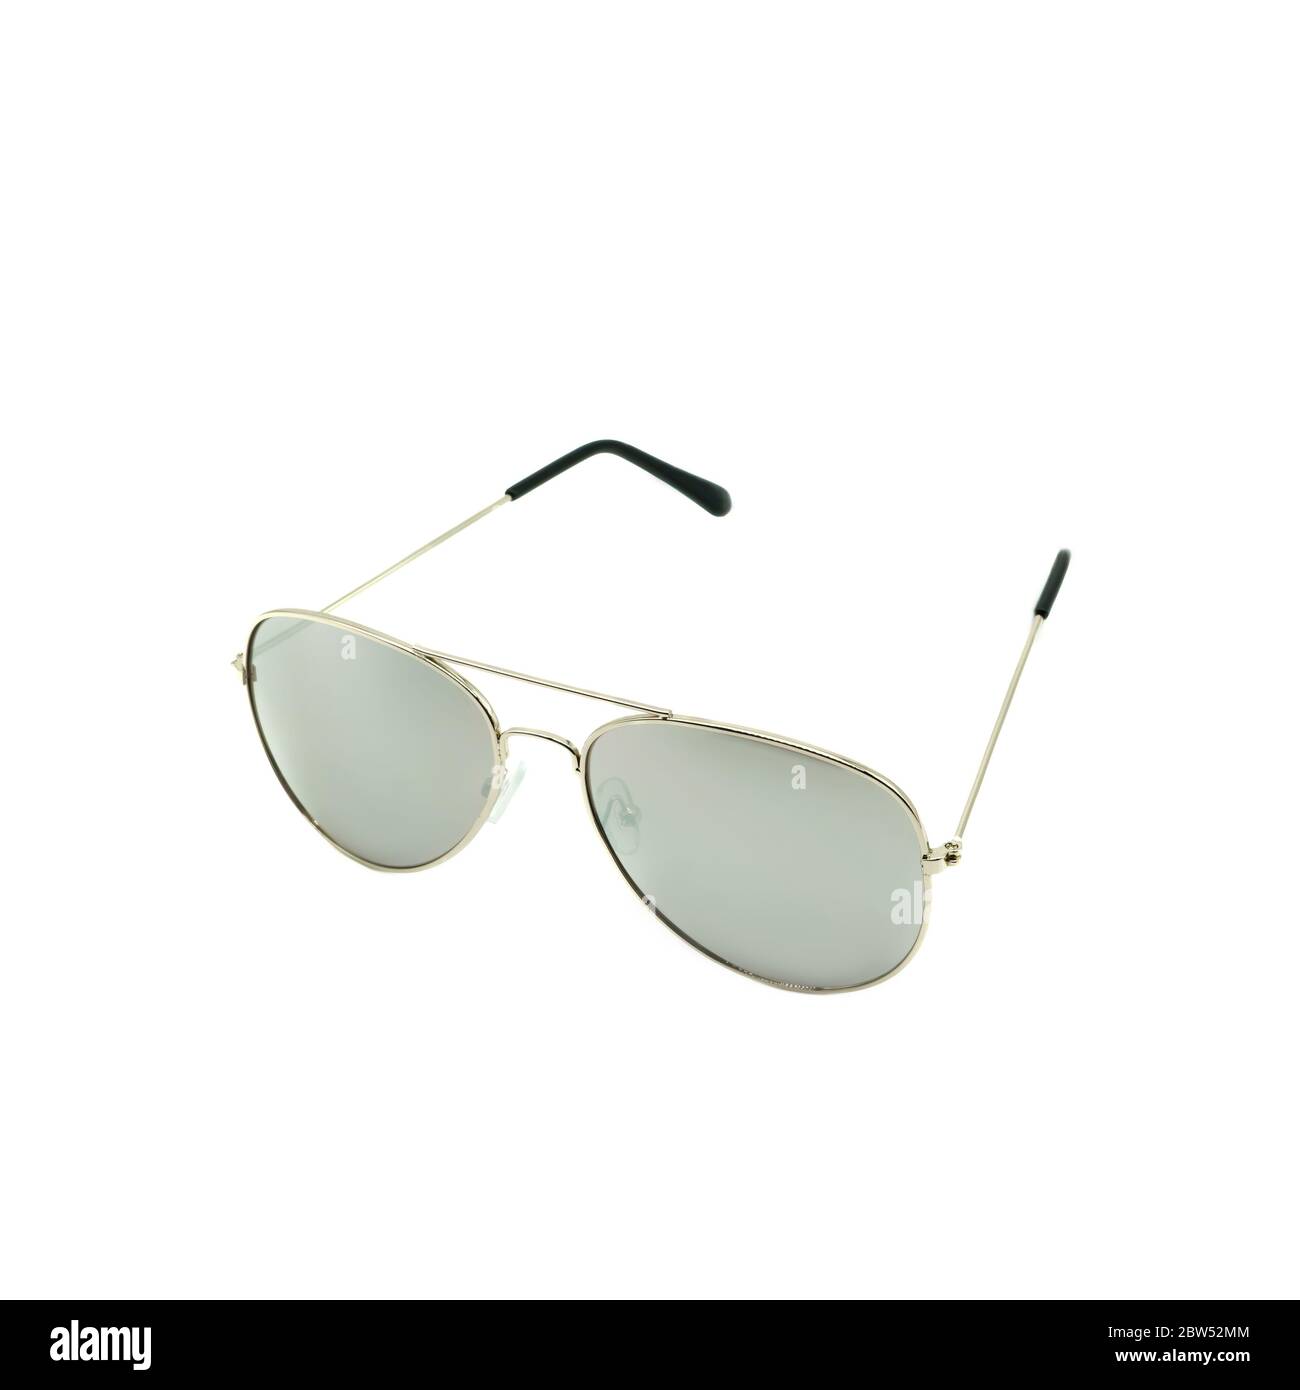 Silver mirrored sunglasses with a silver frame, white background Stock Photo